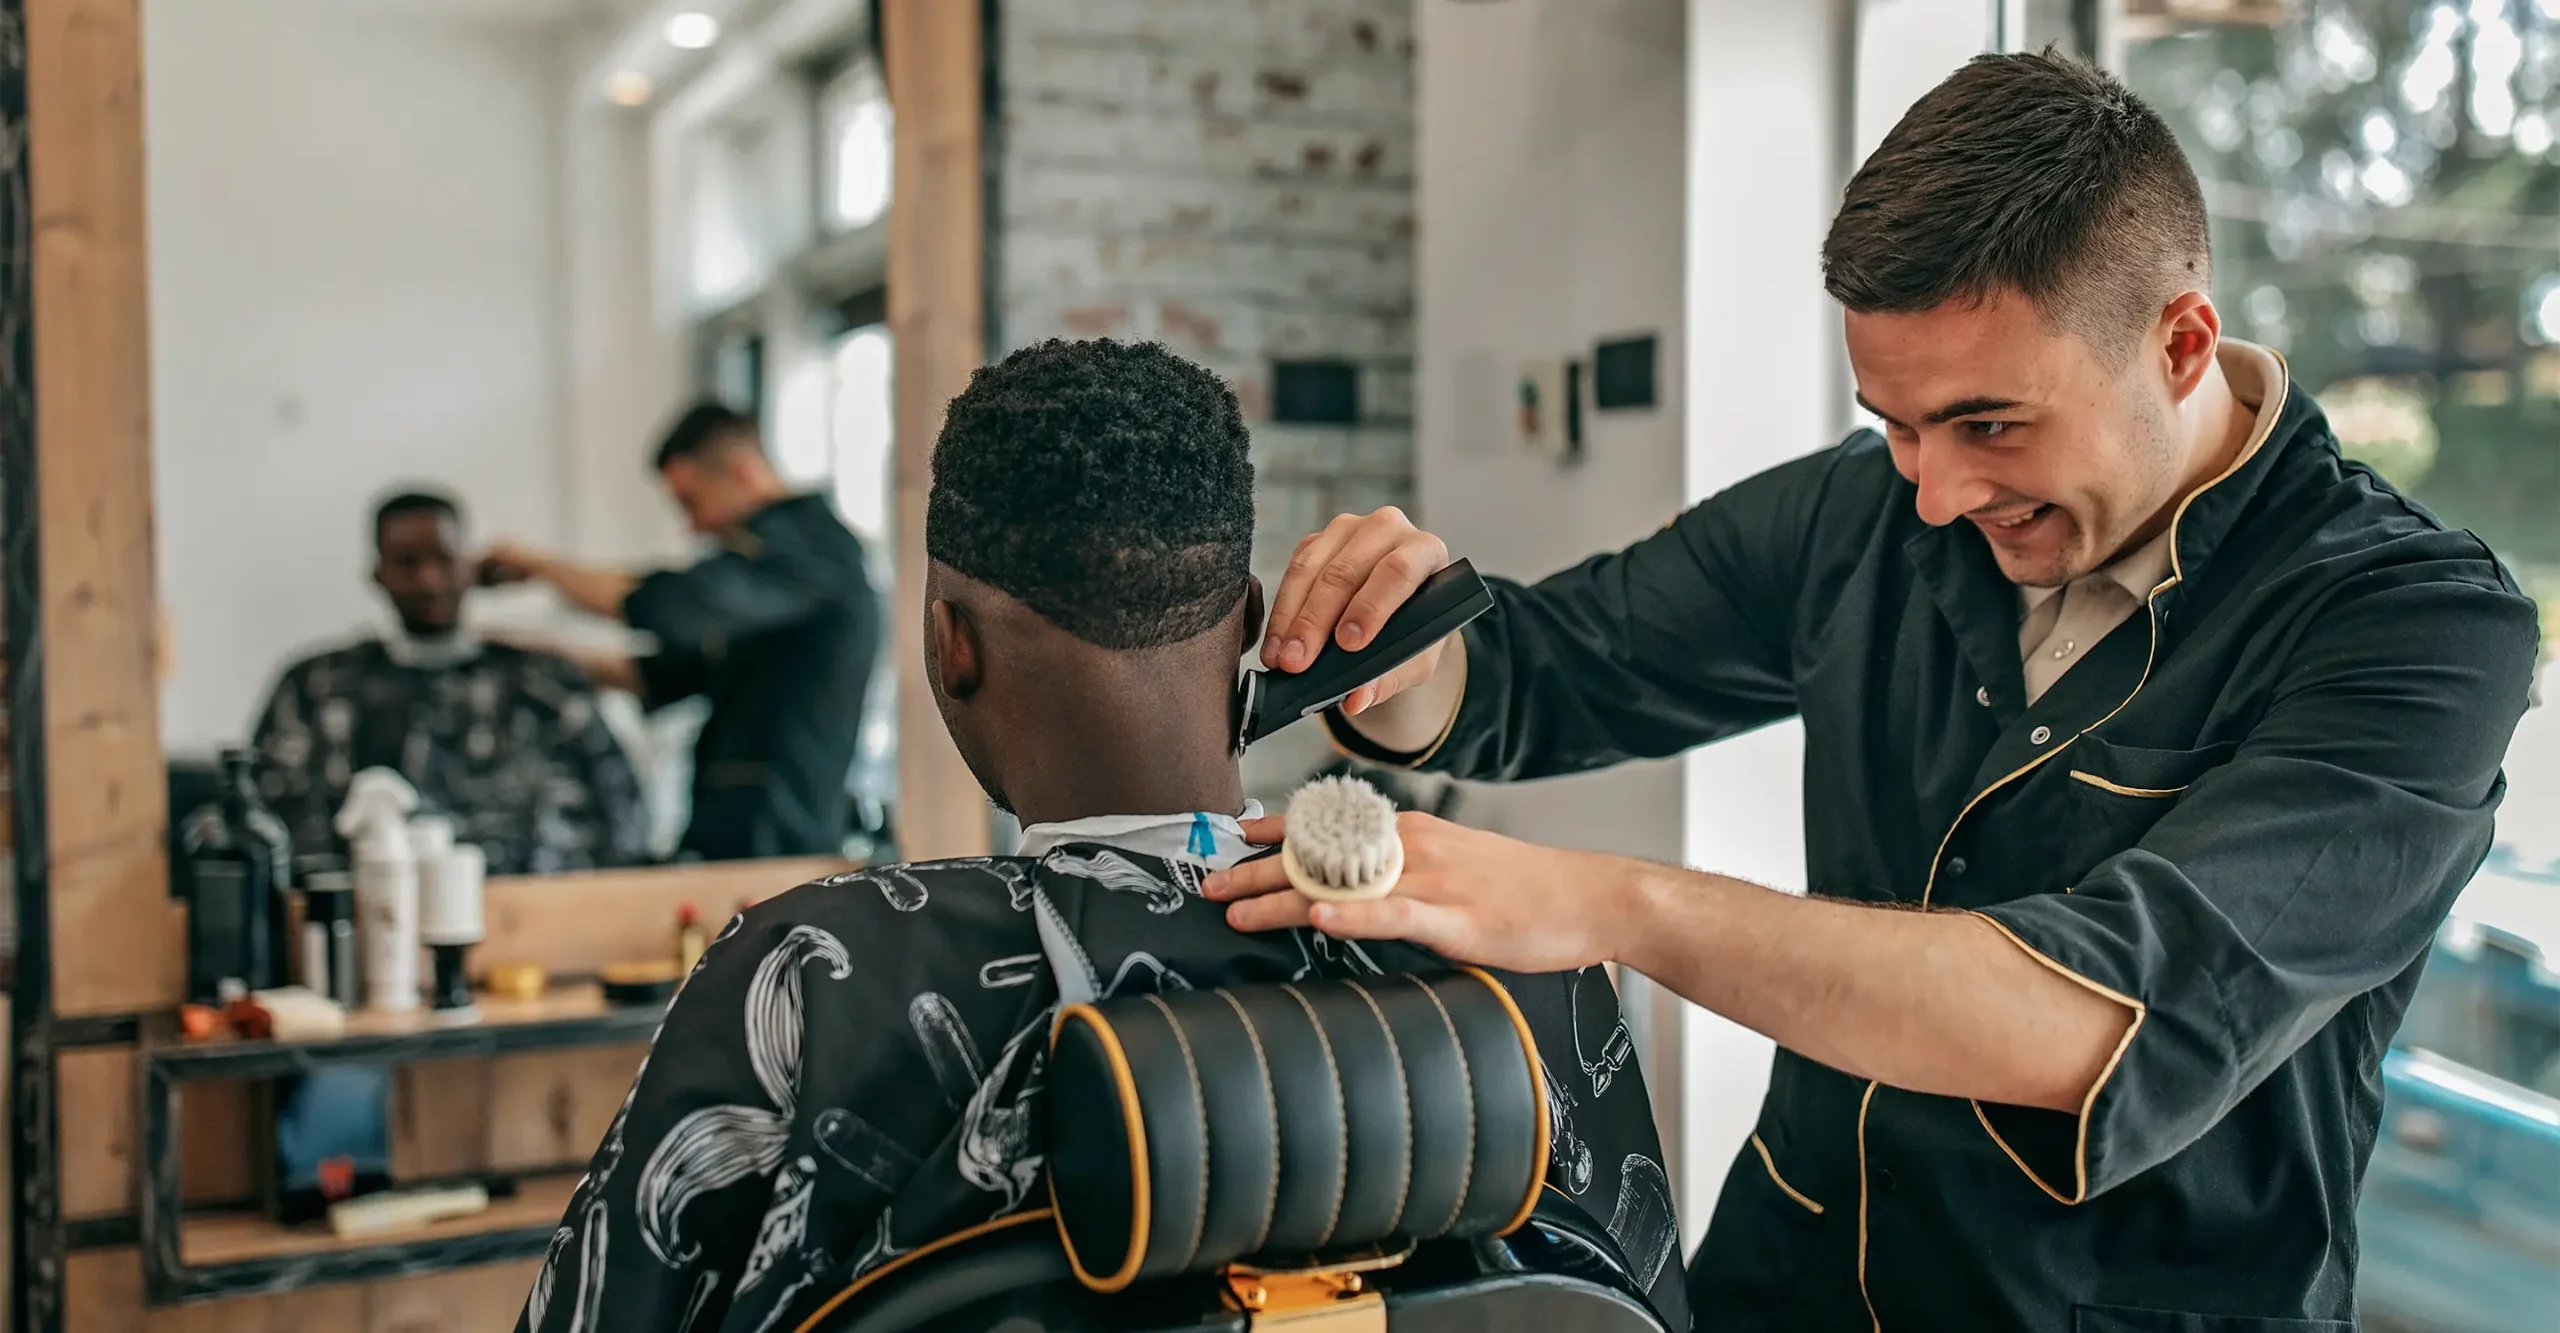 Man learning how to style his hair from his barber.